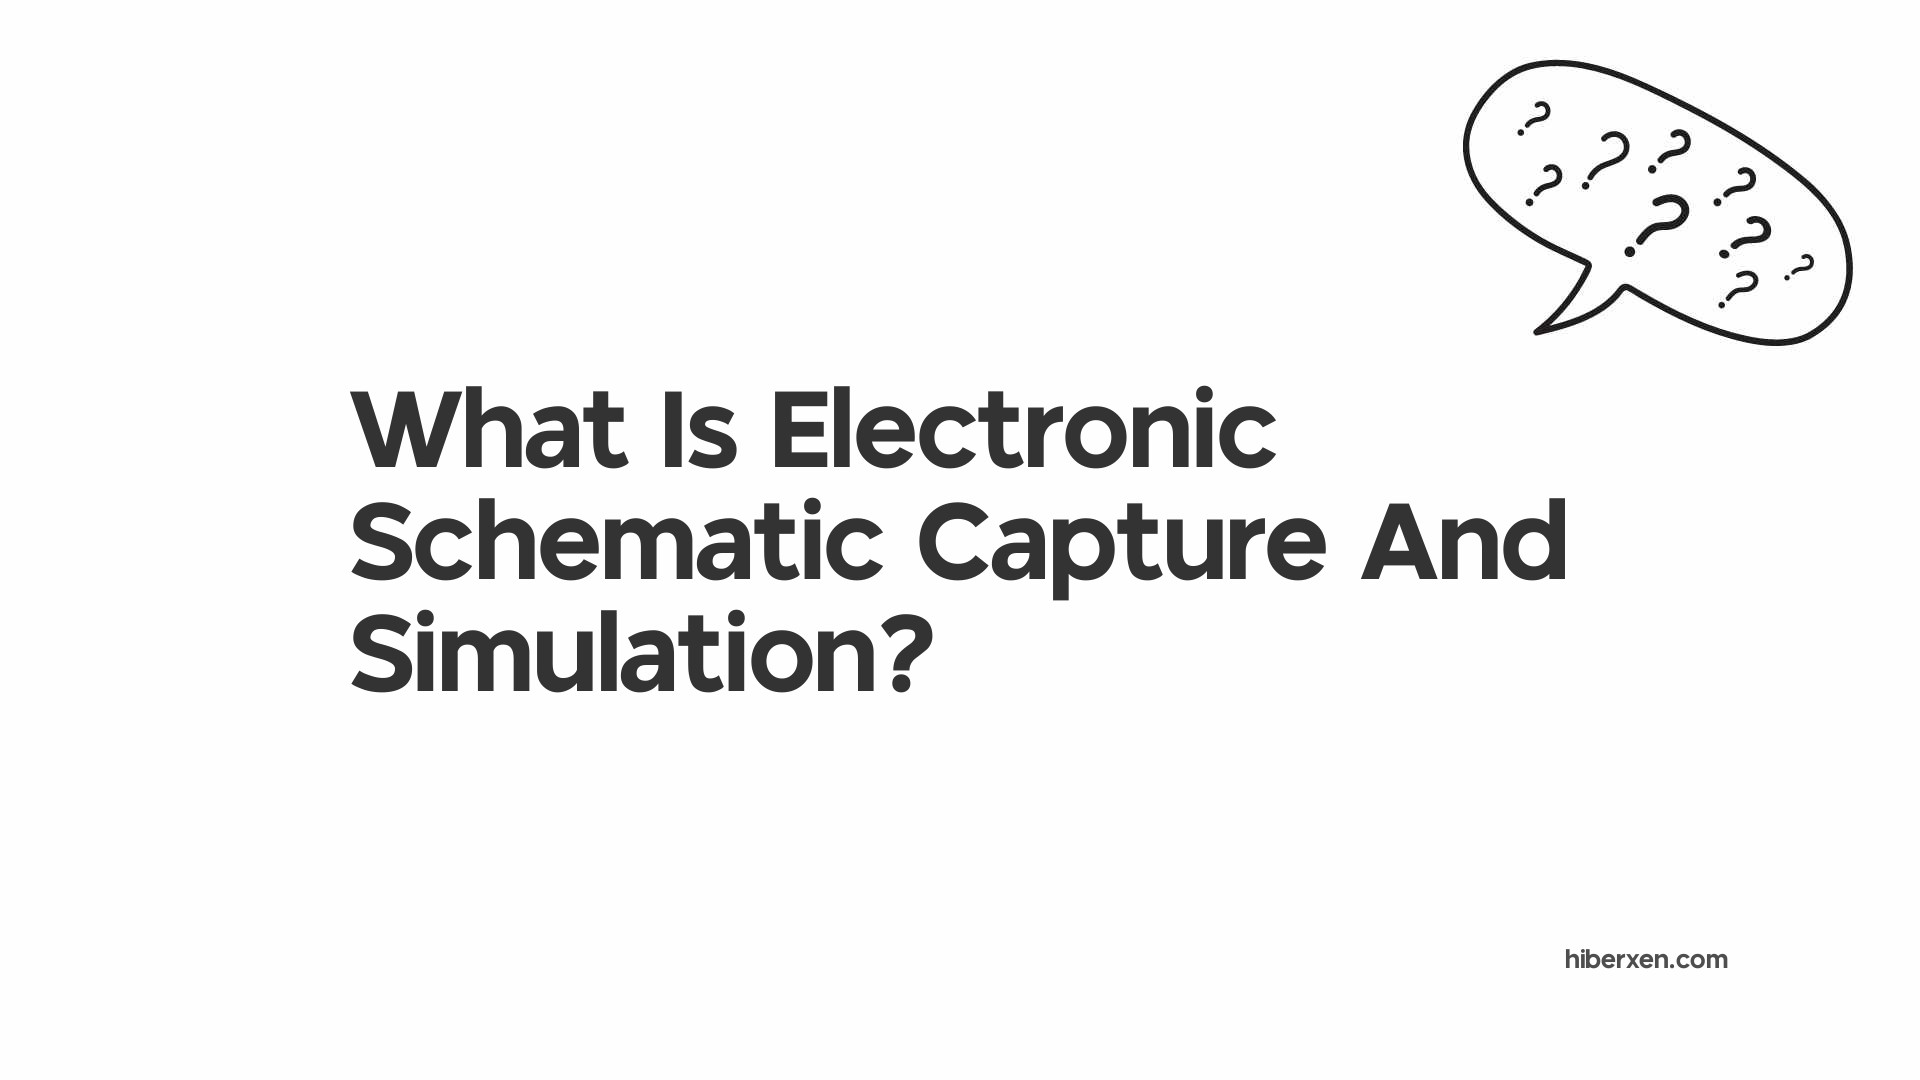 What Is Electronic Schematic Capture And Simulation?